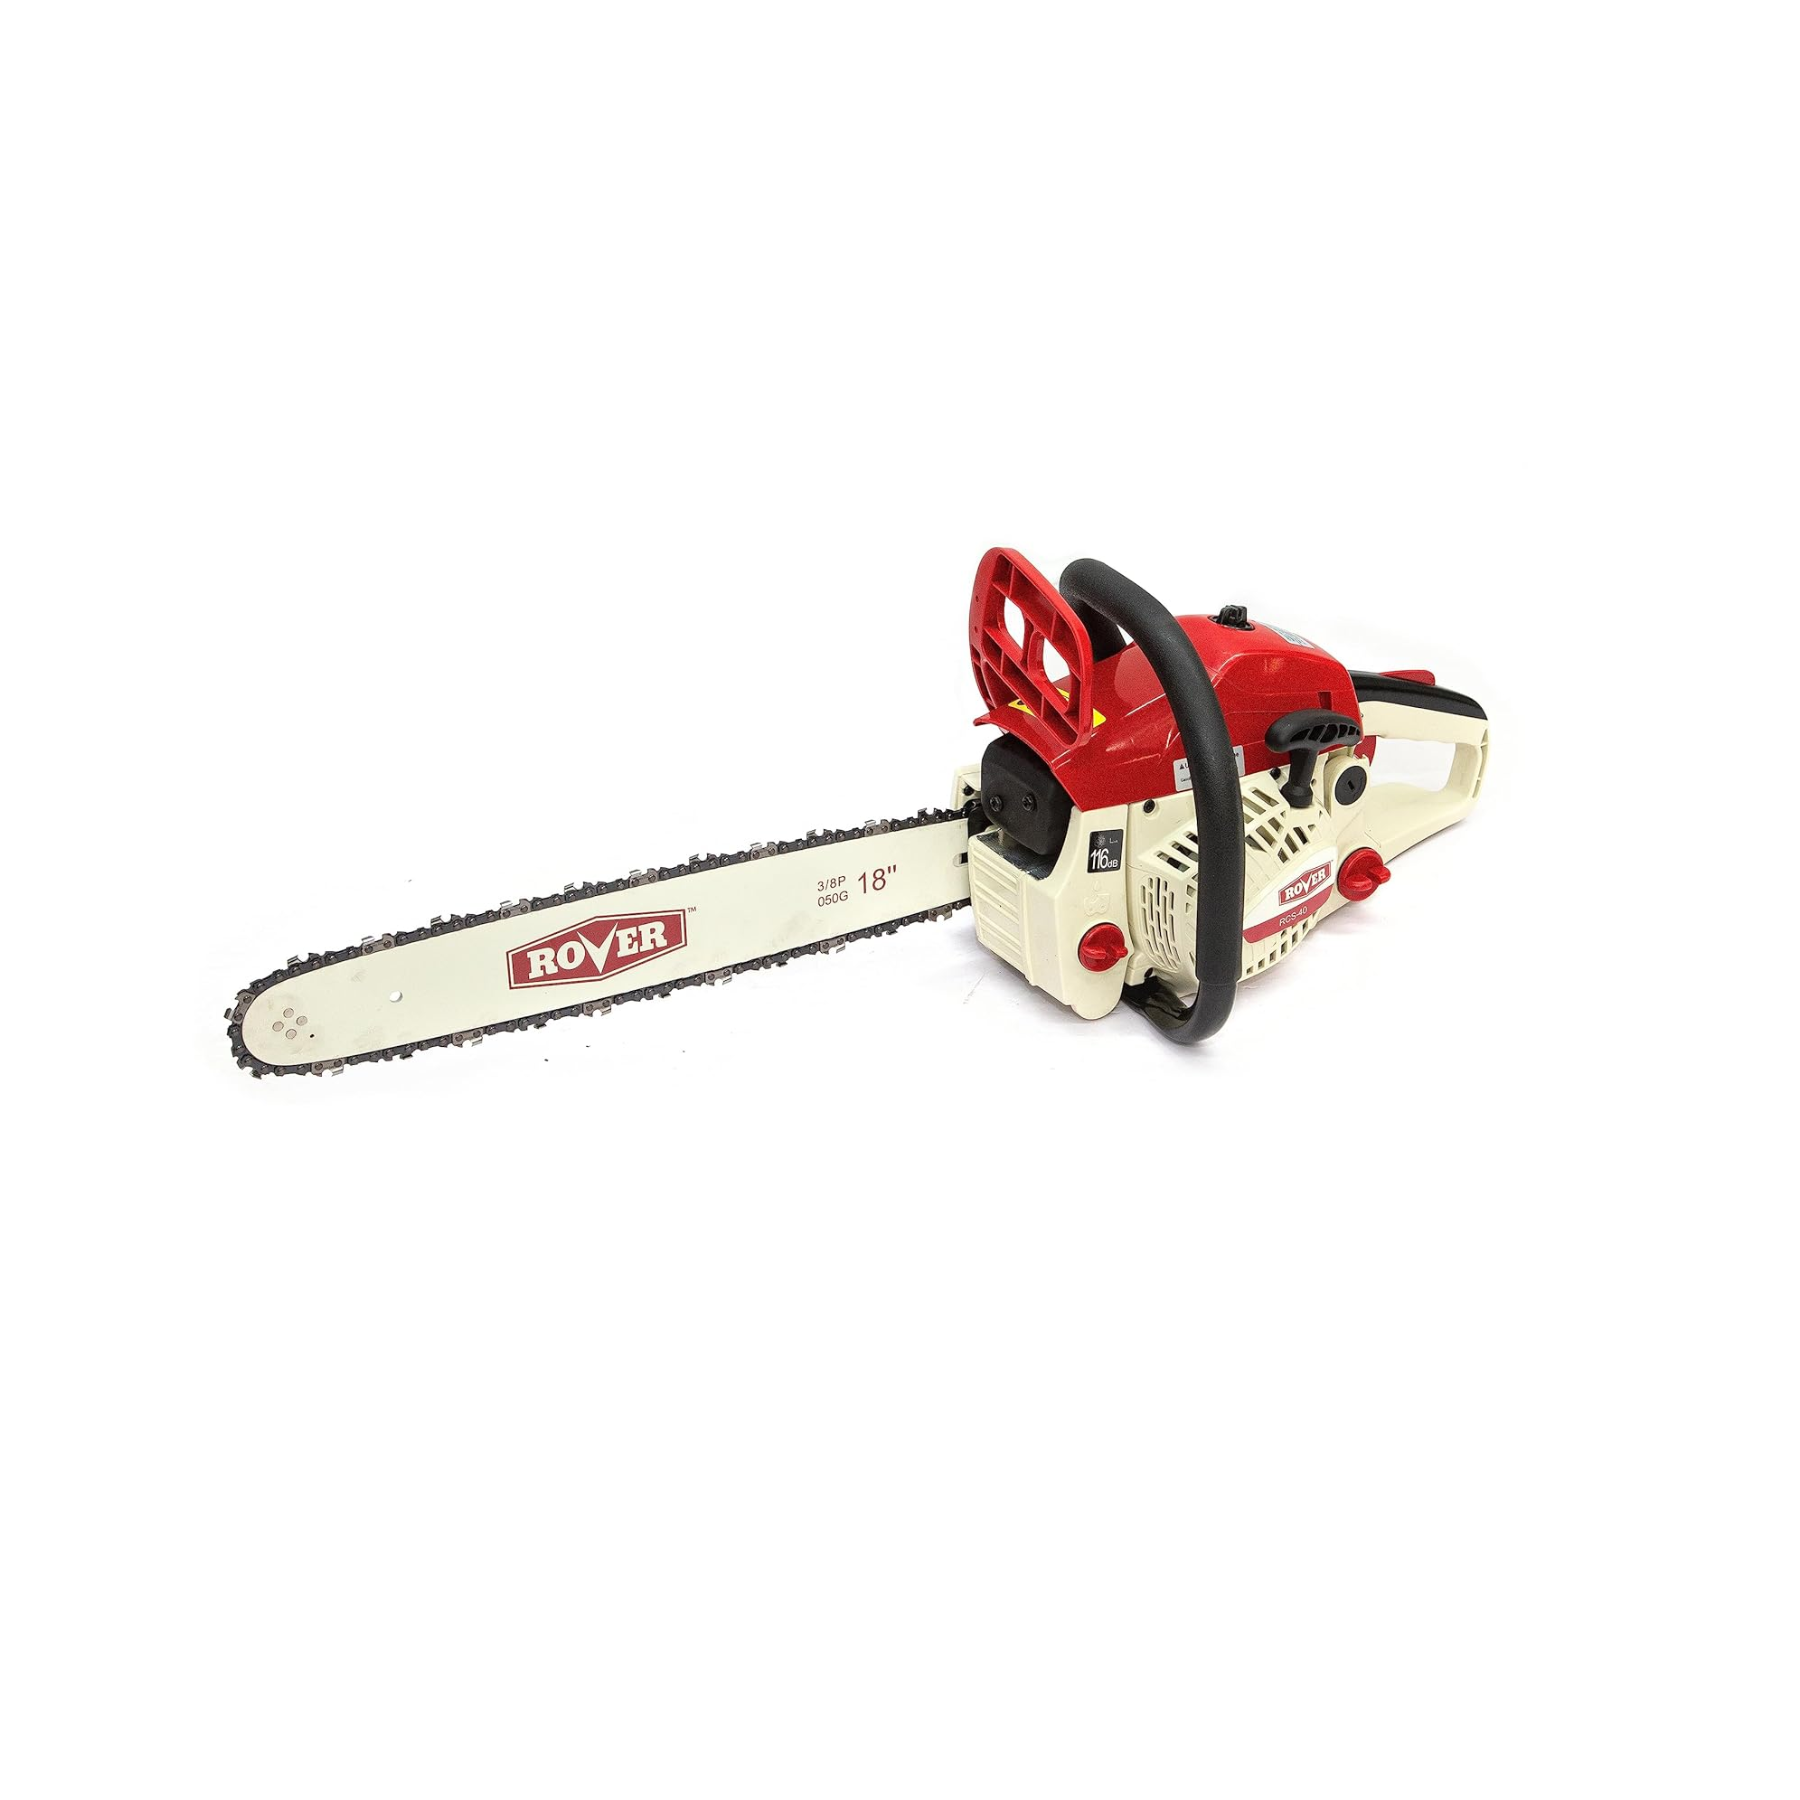 Rover (RCS 40) 18 inch Gasoline Chain Saw